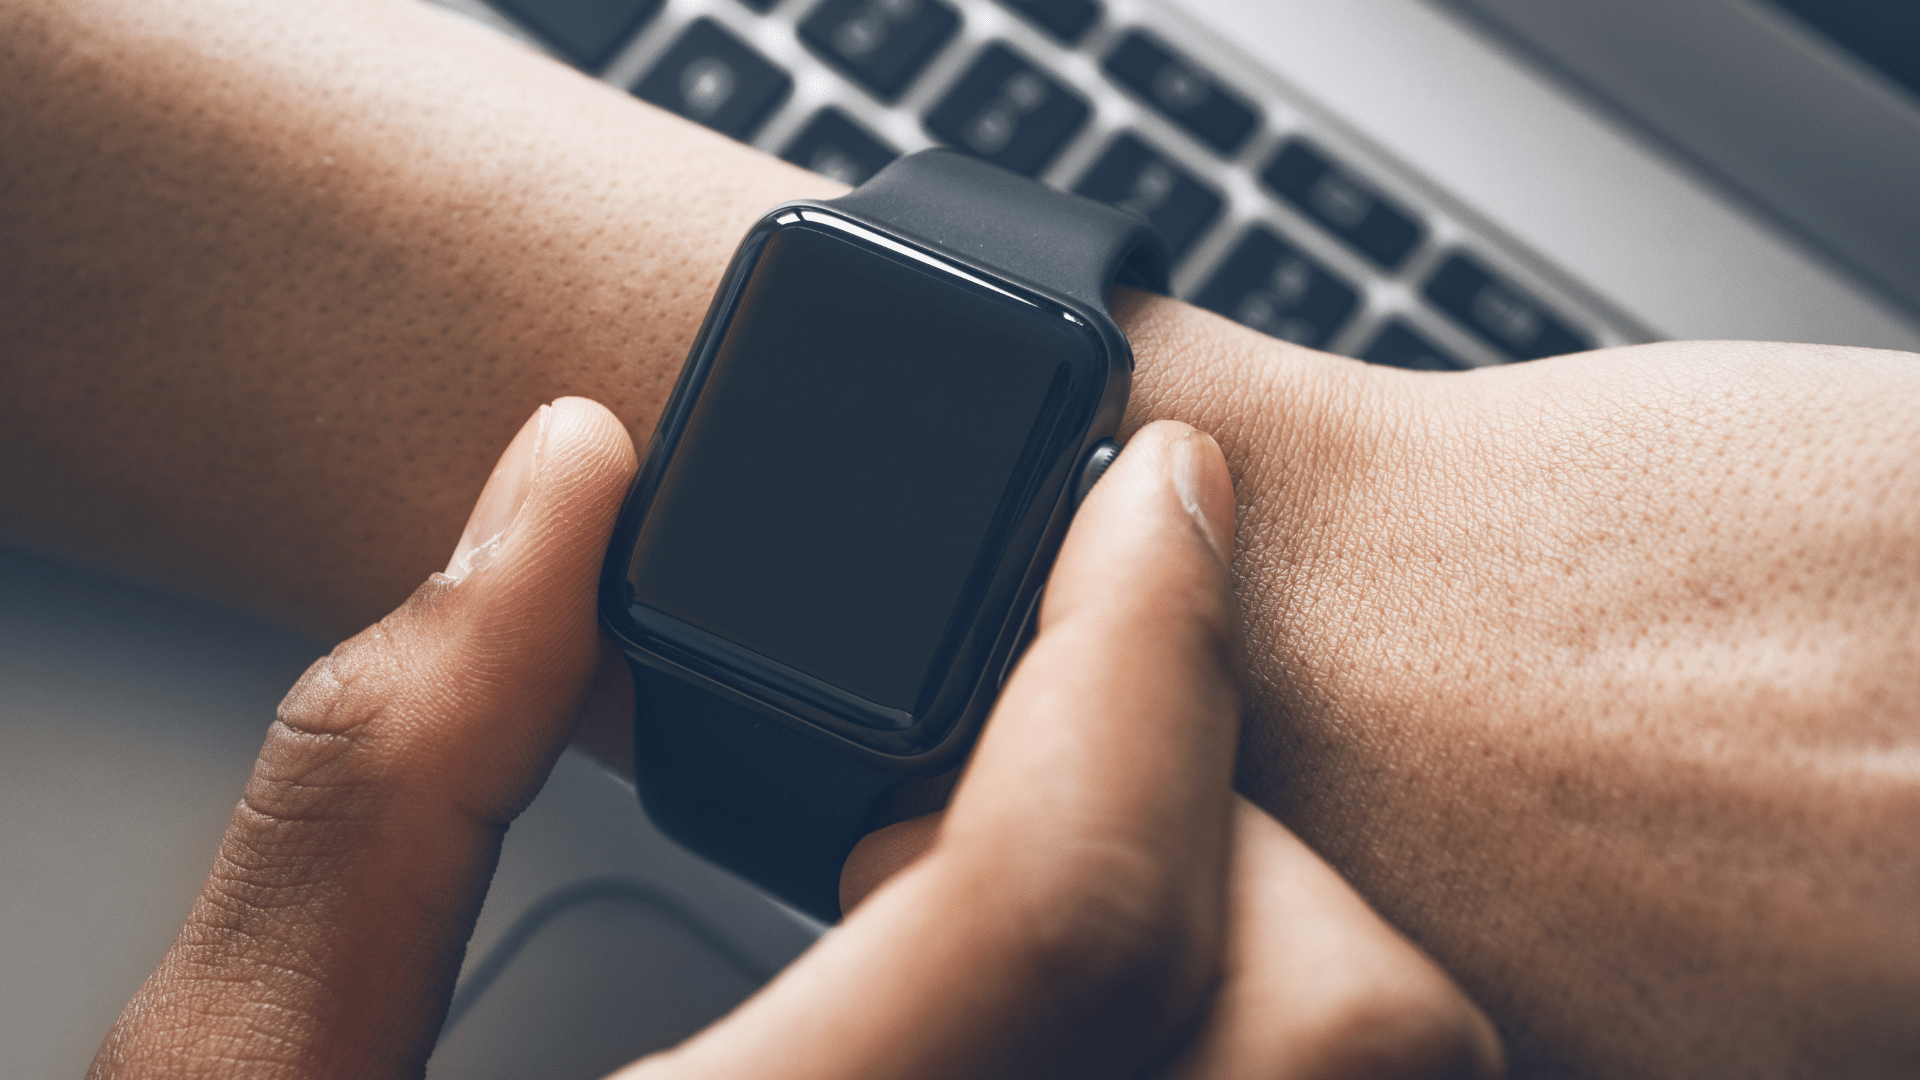 How to Reboot Your Apple Watch